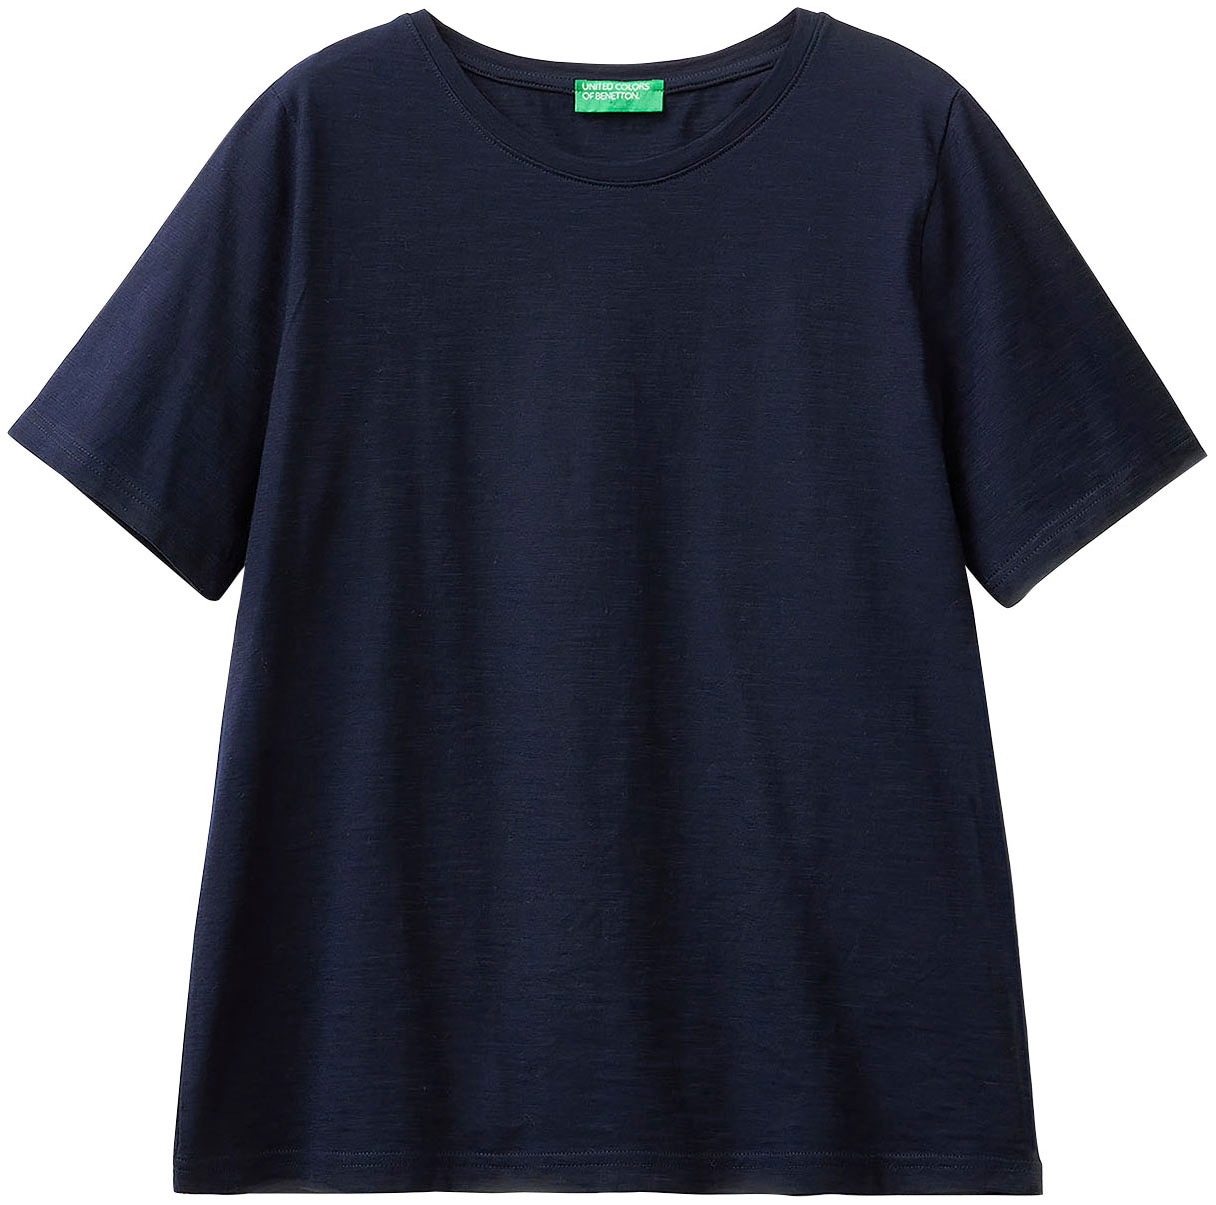 United Colors of Benetton T-Shirt, bei cleaner ♕ in Basic-Optik